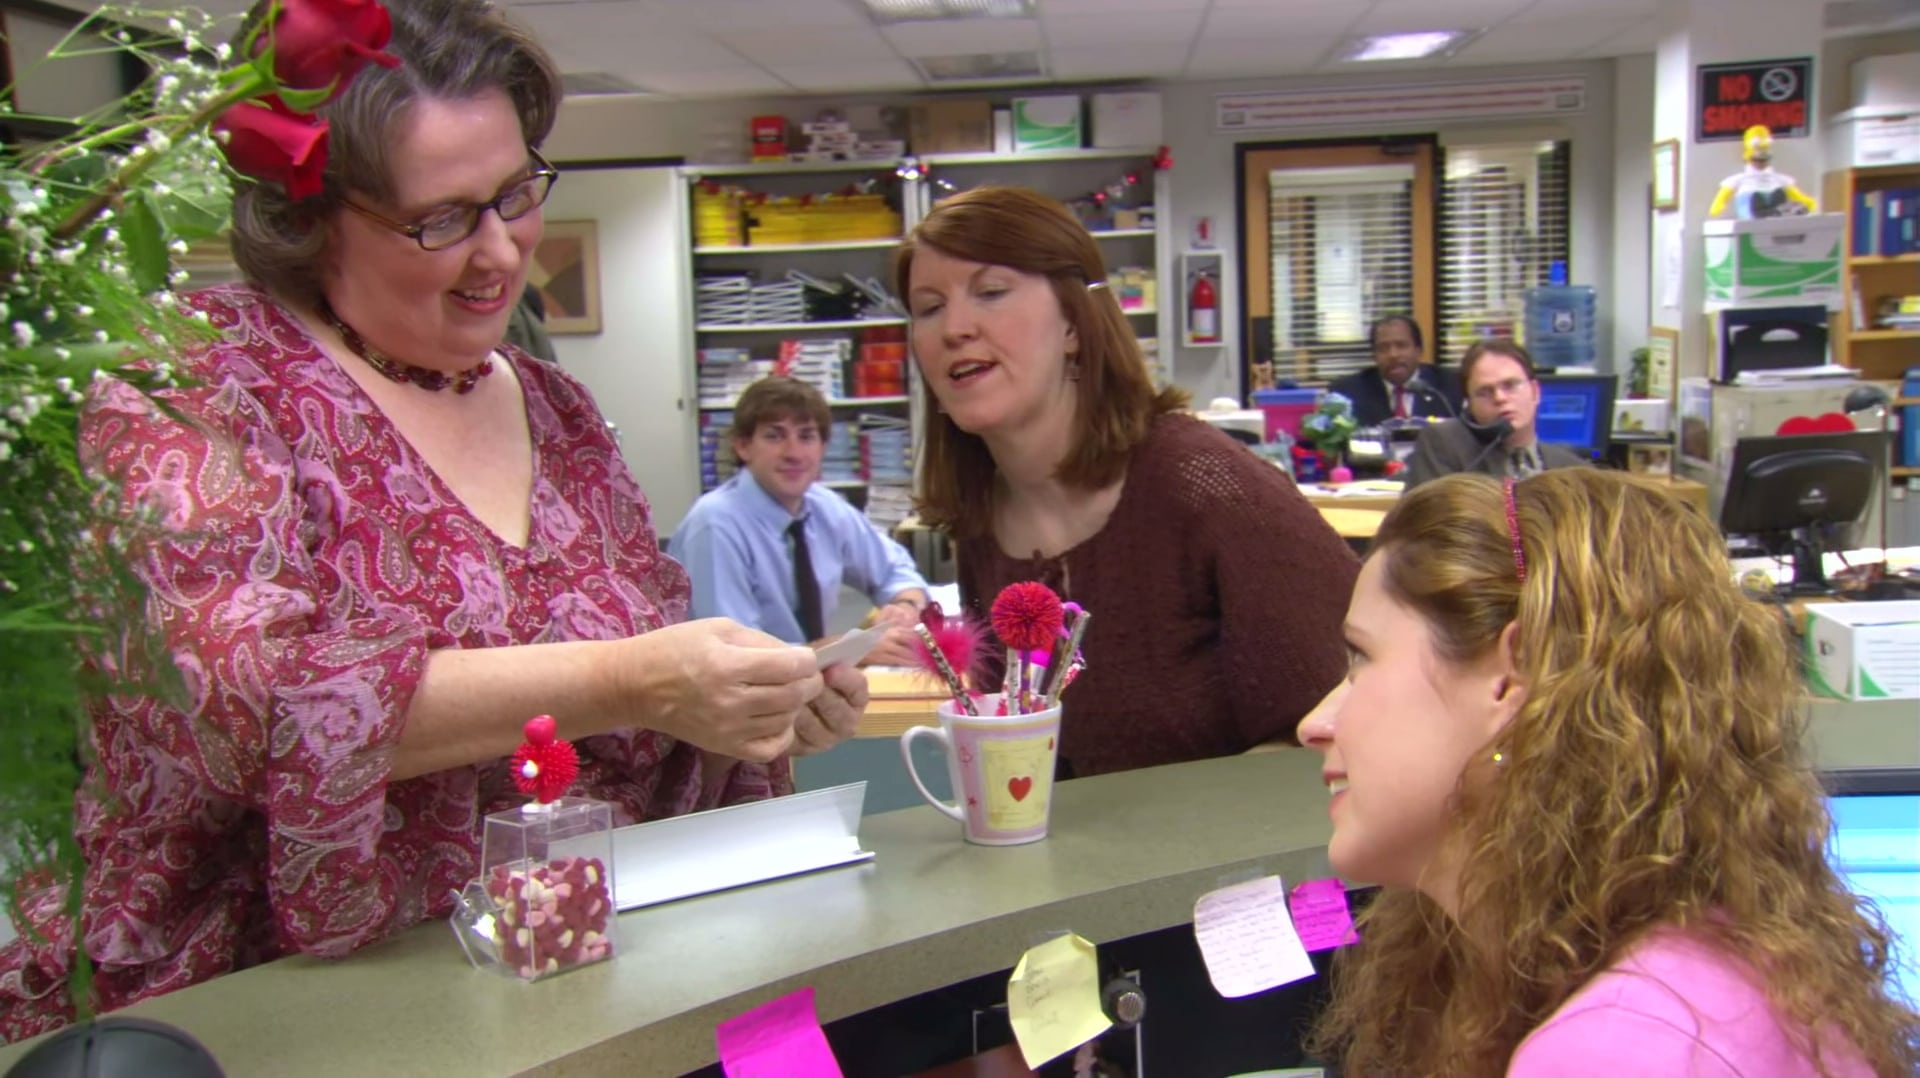 Watch The Office (US) season 2 episode 16 streaming online 